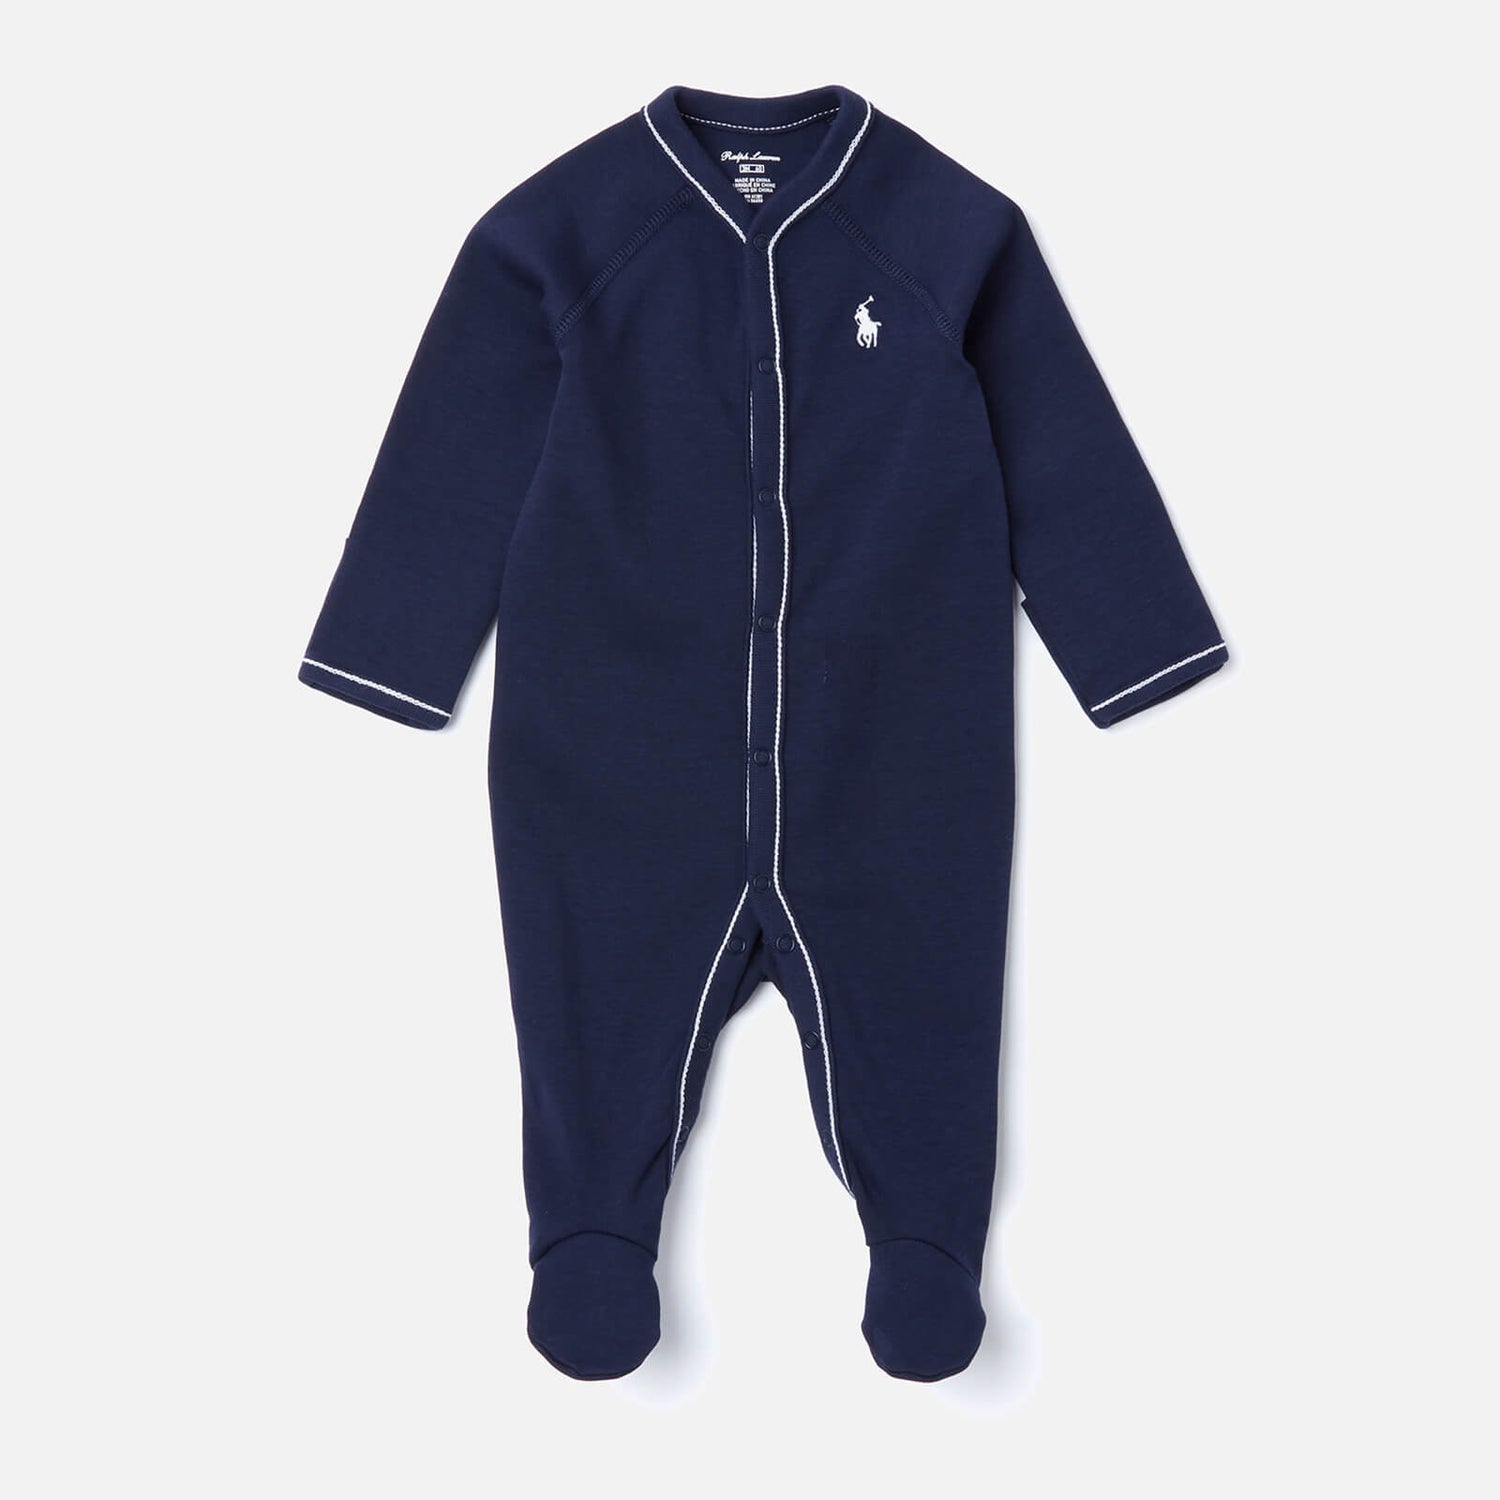 Polo Ralph Lauren Babys Sleepsuit - French Navy - 3 Months